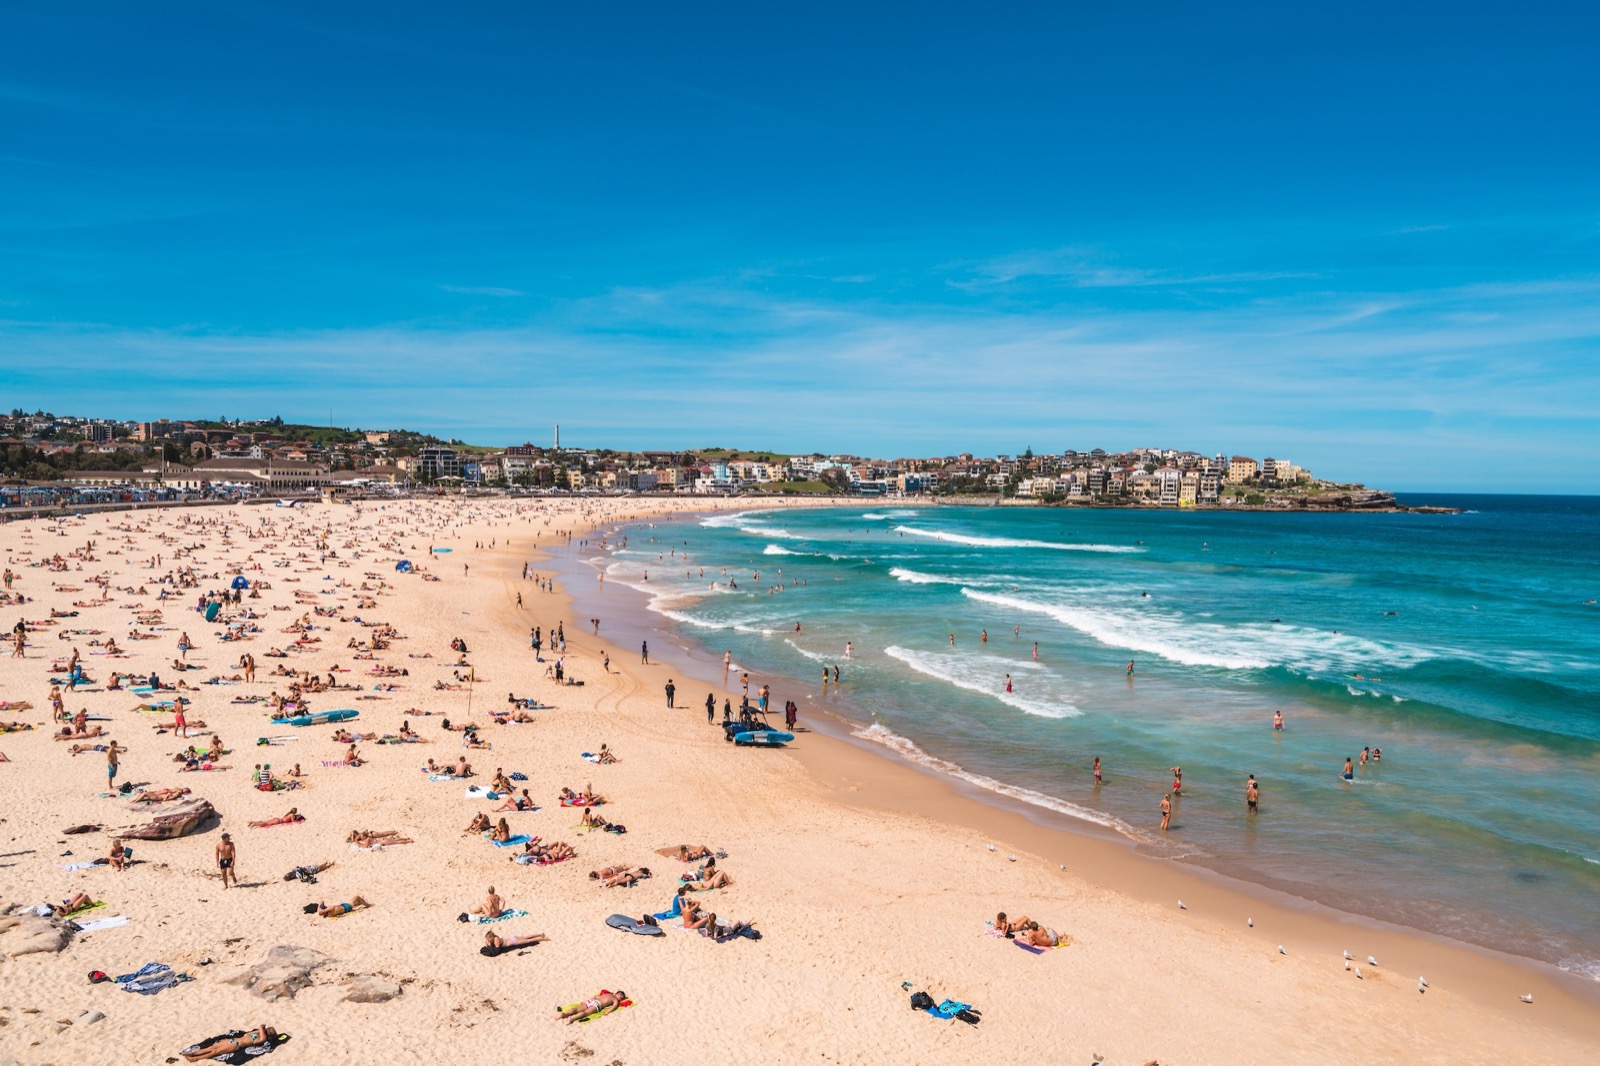 Can You Pass This 40-Question Geography Test That Gets Progressively Harder With Each Question? Bondi Beach, Sydney, Australia